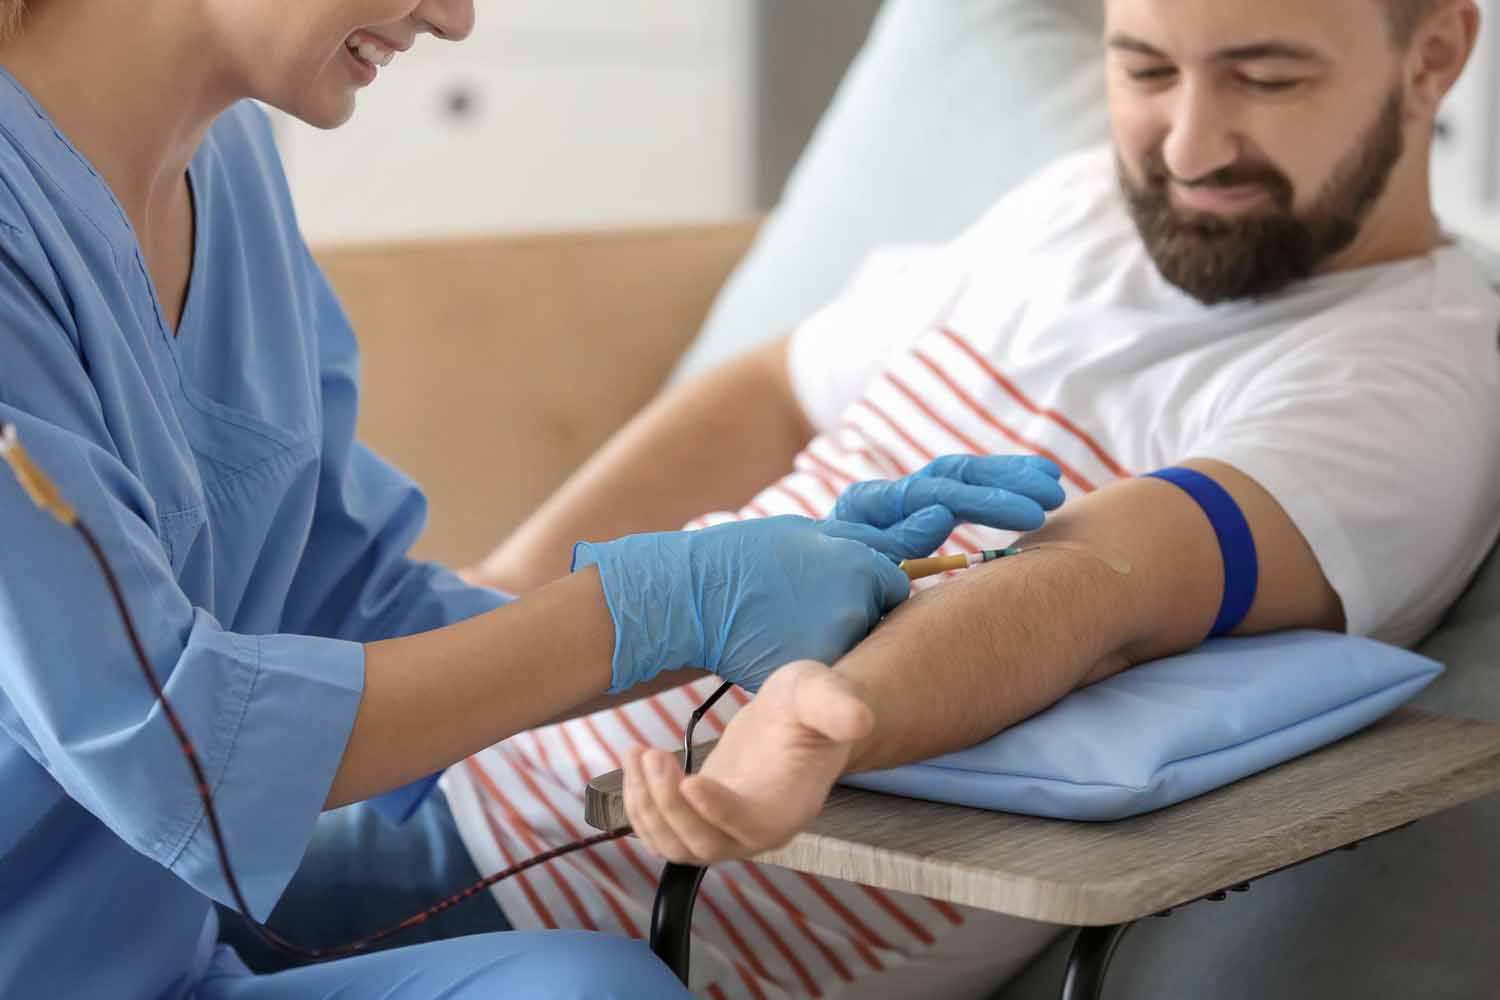 Woman inserting a blood collection needle into a man’s arm